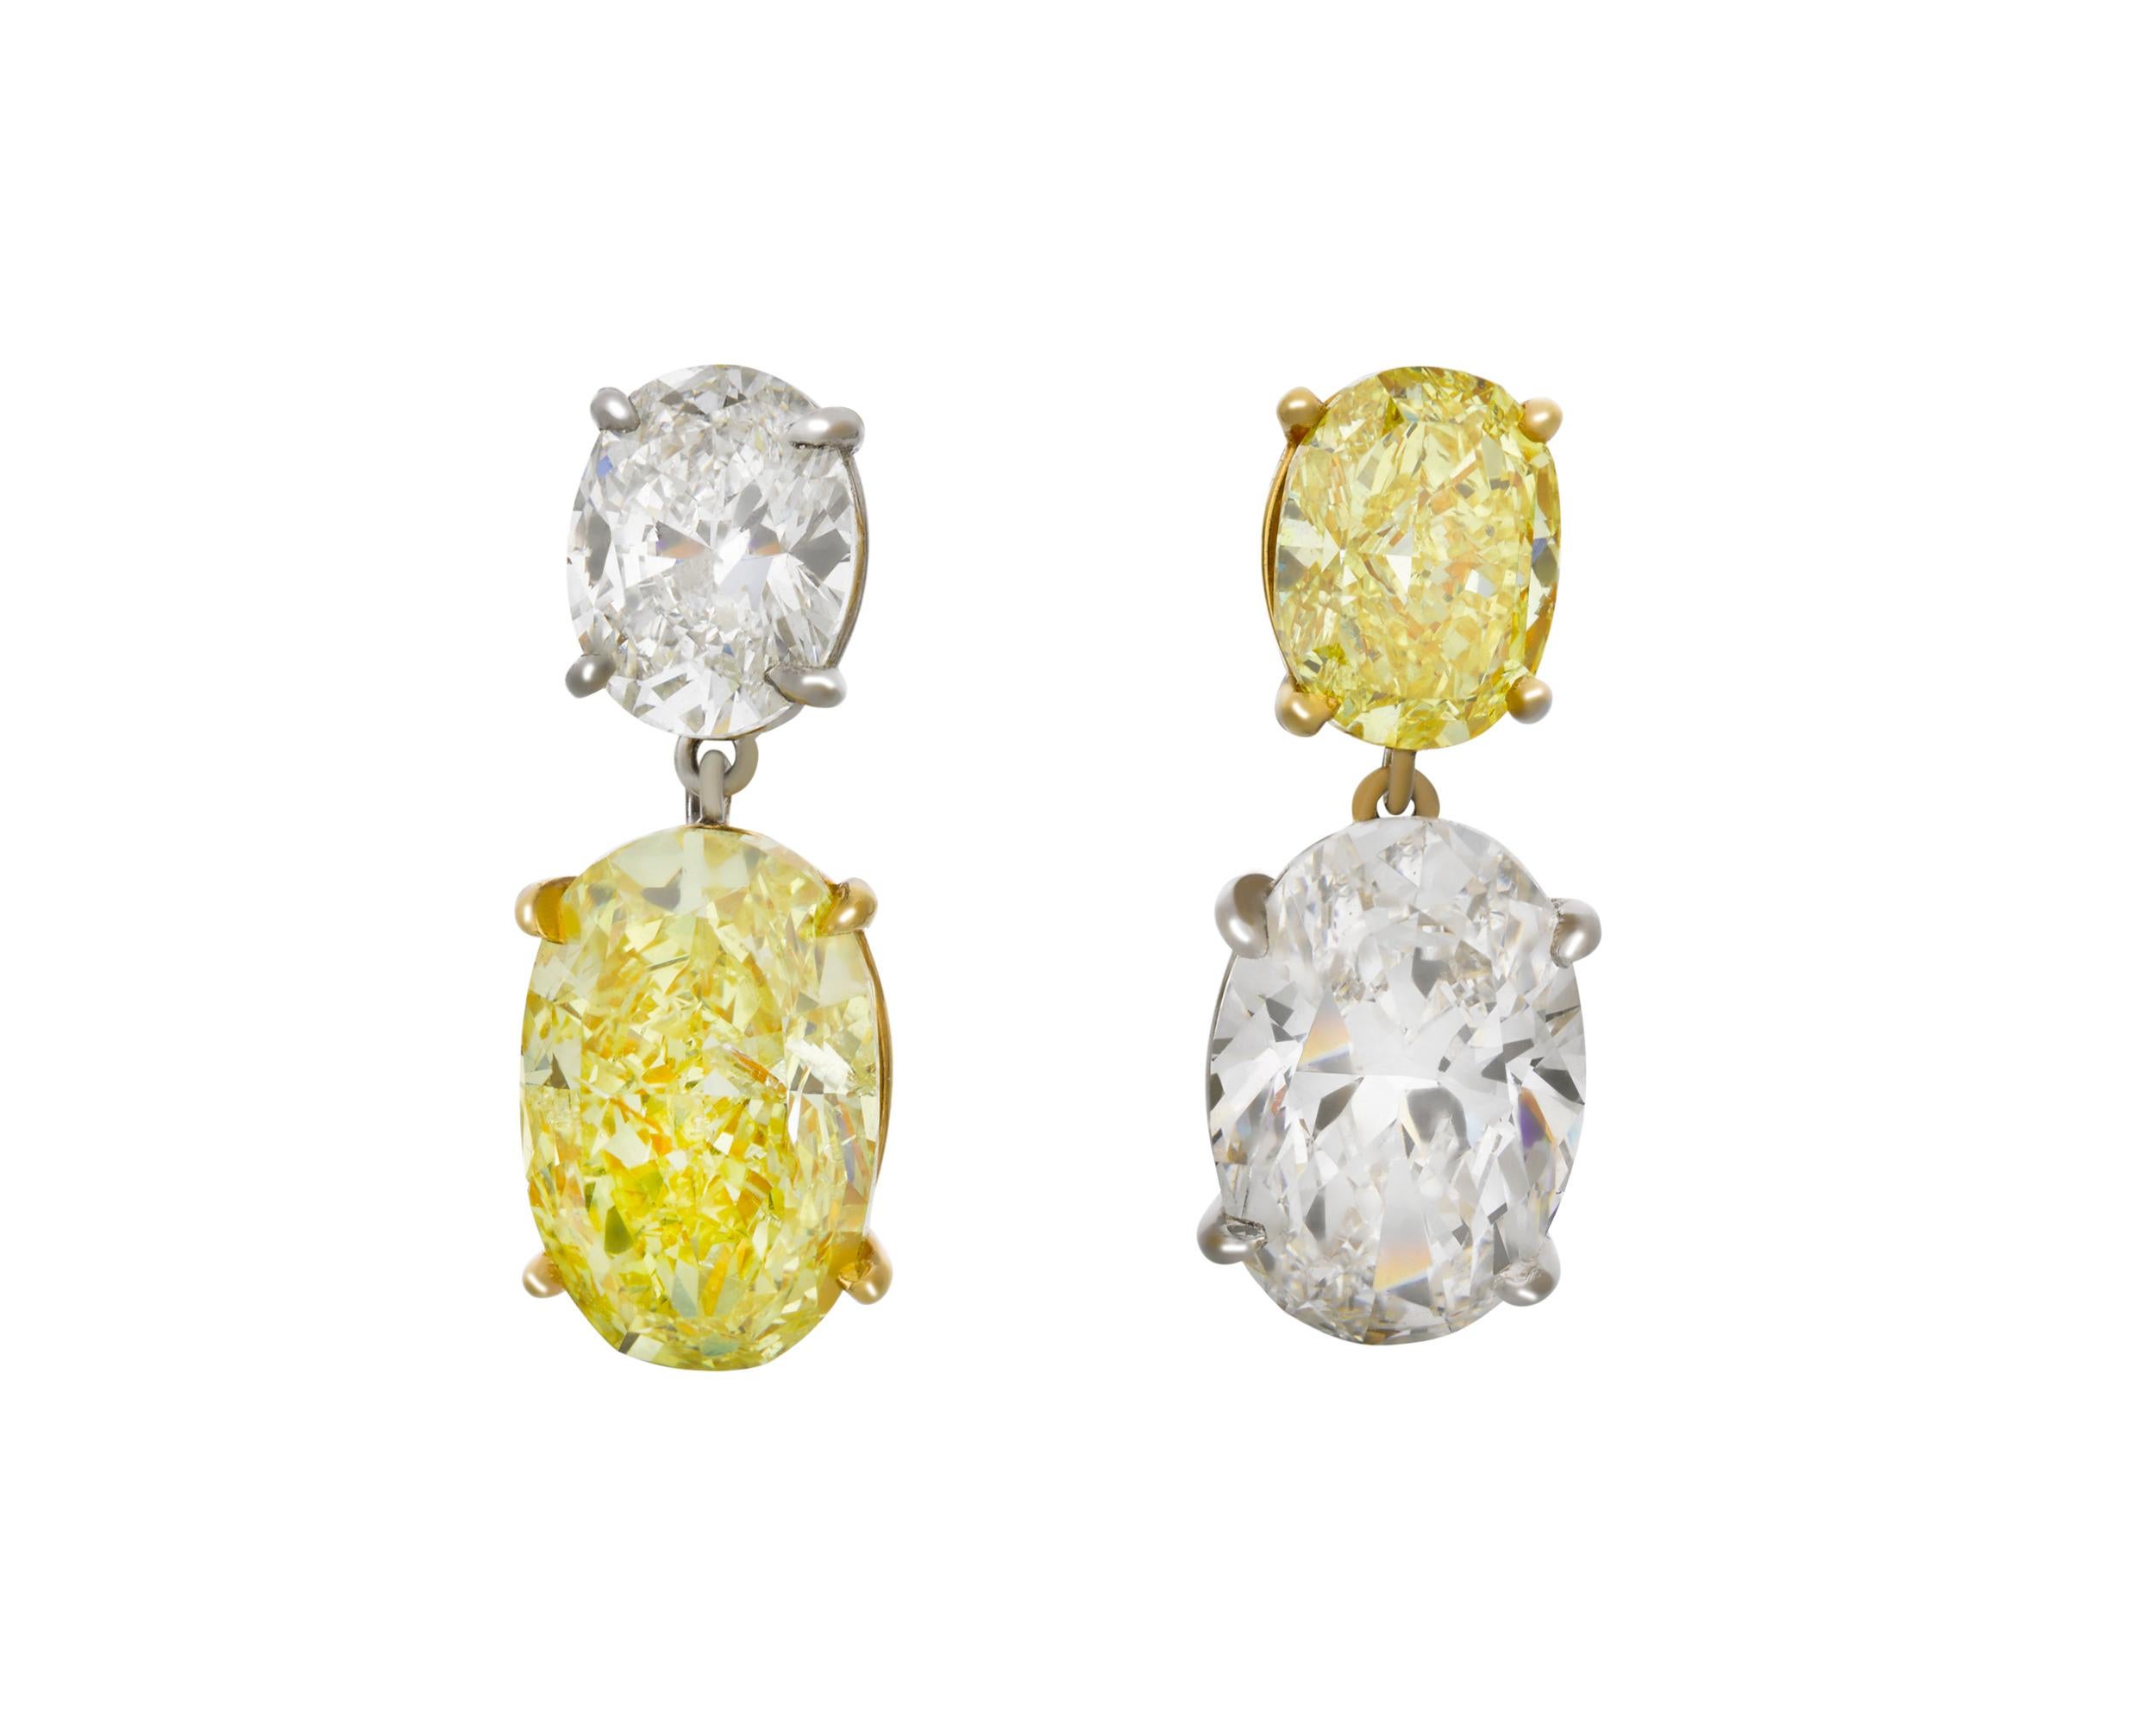 Two natural fancy yellow diamonds totaling 3.62 carats are set in these dazzling earrings. The gems, which weigh 2.54 and 1.08 carats, are certified by the Gemological Institute of America as entirely natural. The larger of the two is fancy intense